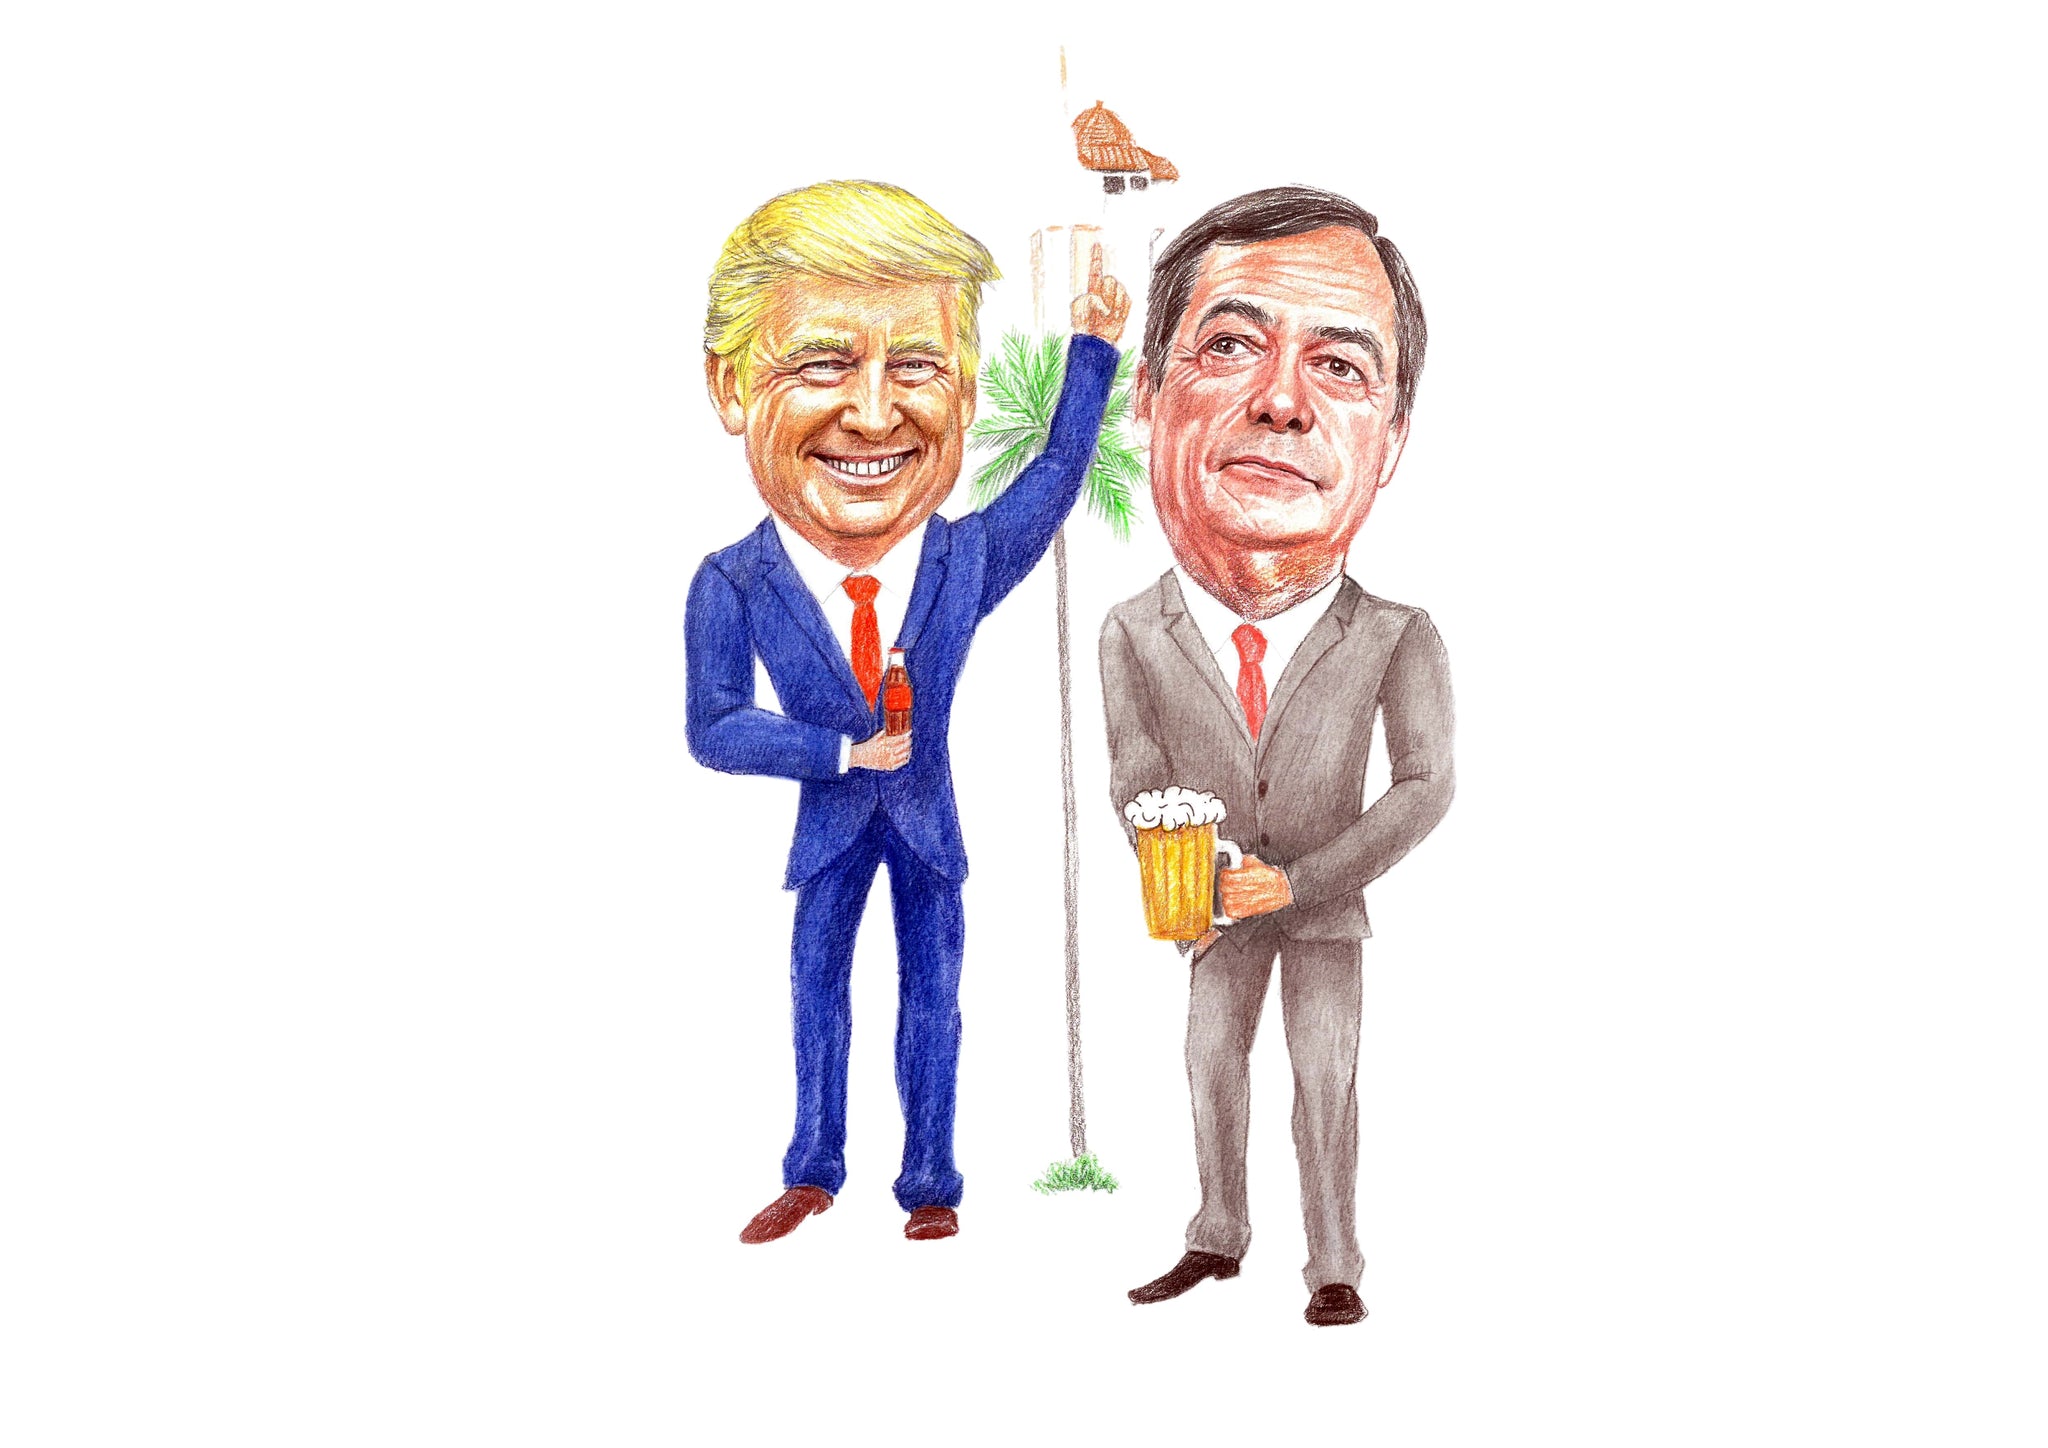 Coke for Trump, pint of ale for Farage at Mar-A-Lago Print